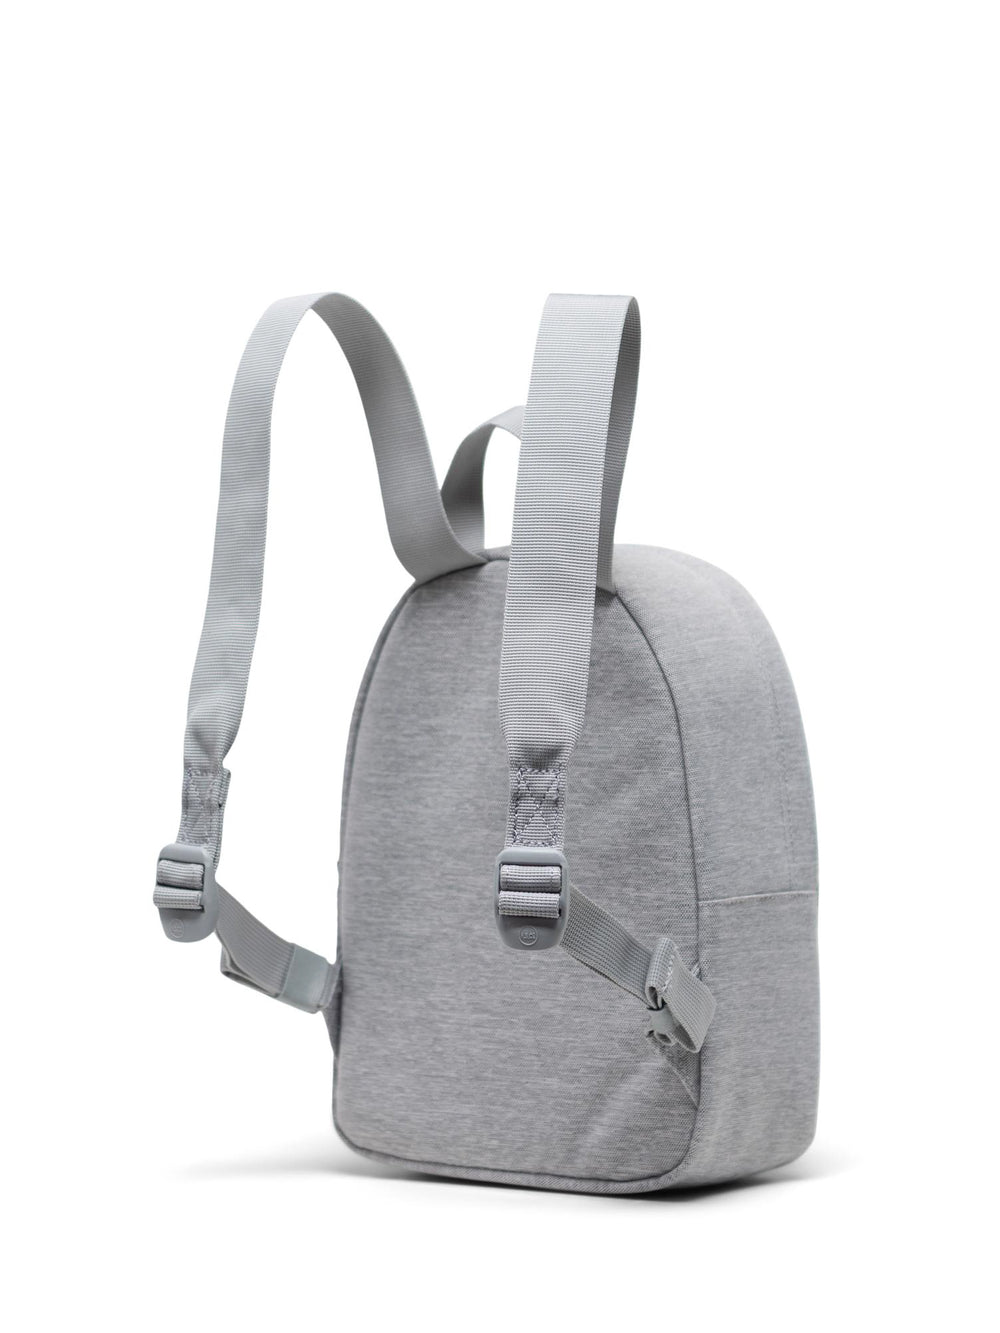 HERSCHEL SUPPLY CO. CLASSIC MINI - GREY/GRIS - CLEARANCE